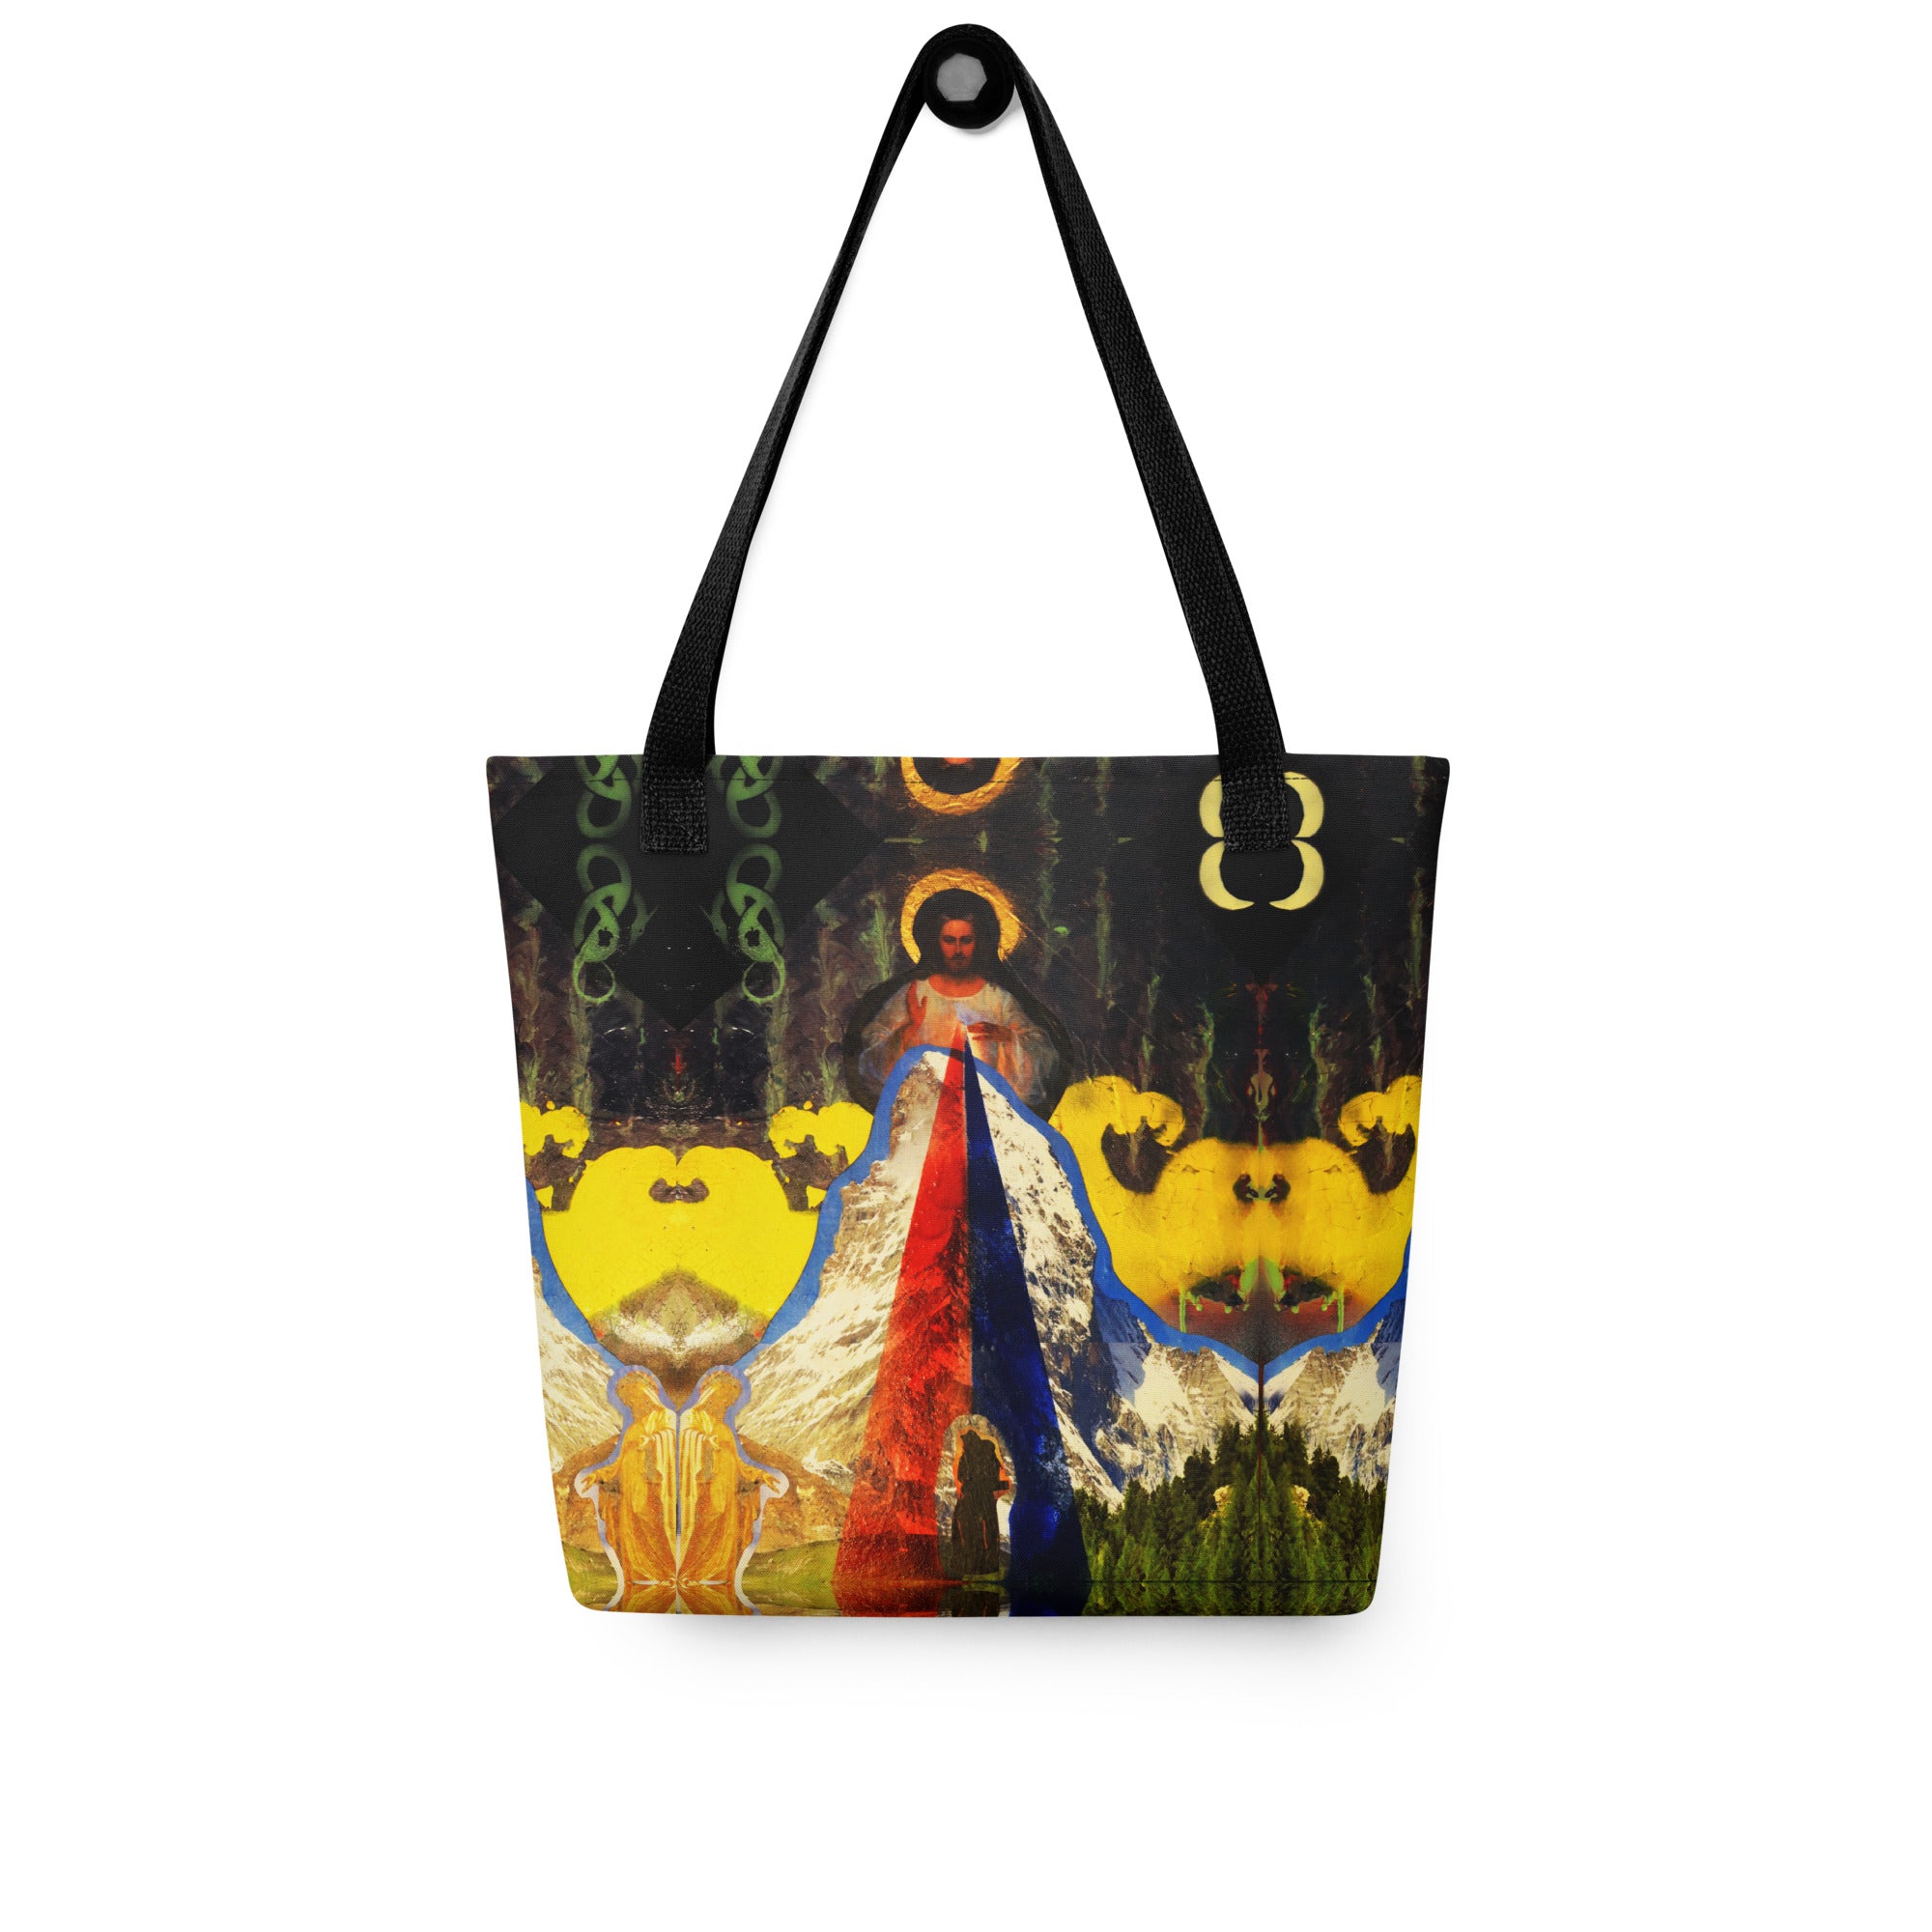 Br. T's Journey To Christ. (Tote.)